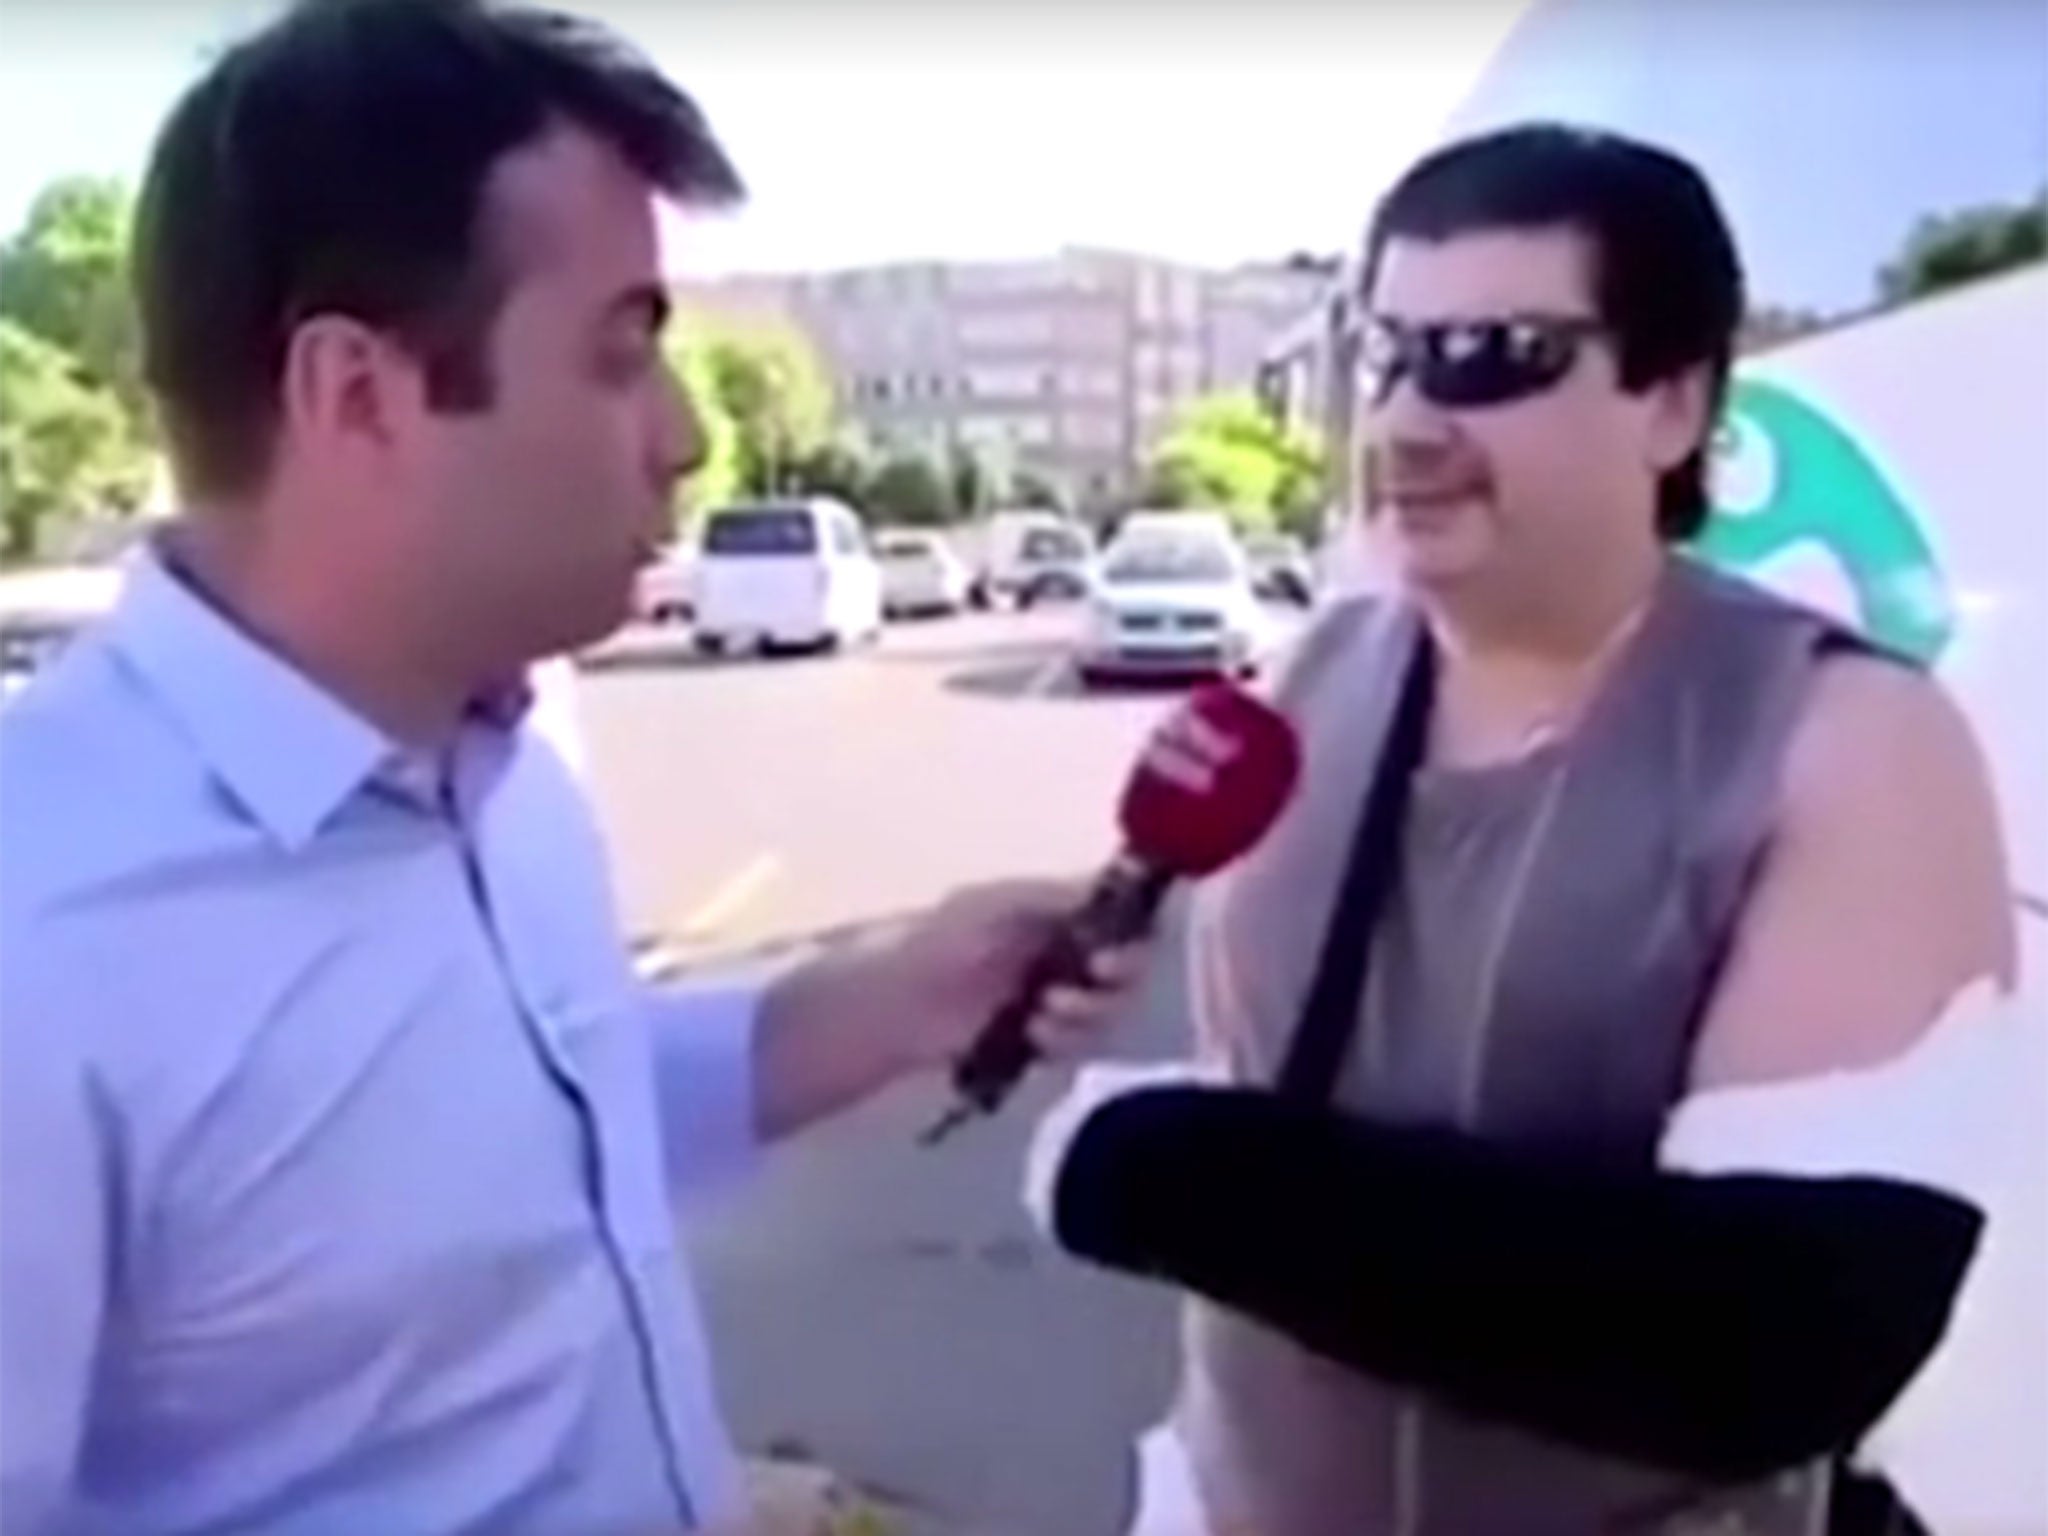 An Irish tourist who went viral in Turkey after a fight with shopkeepers speaks to Show TV